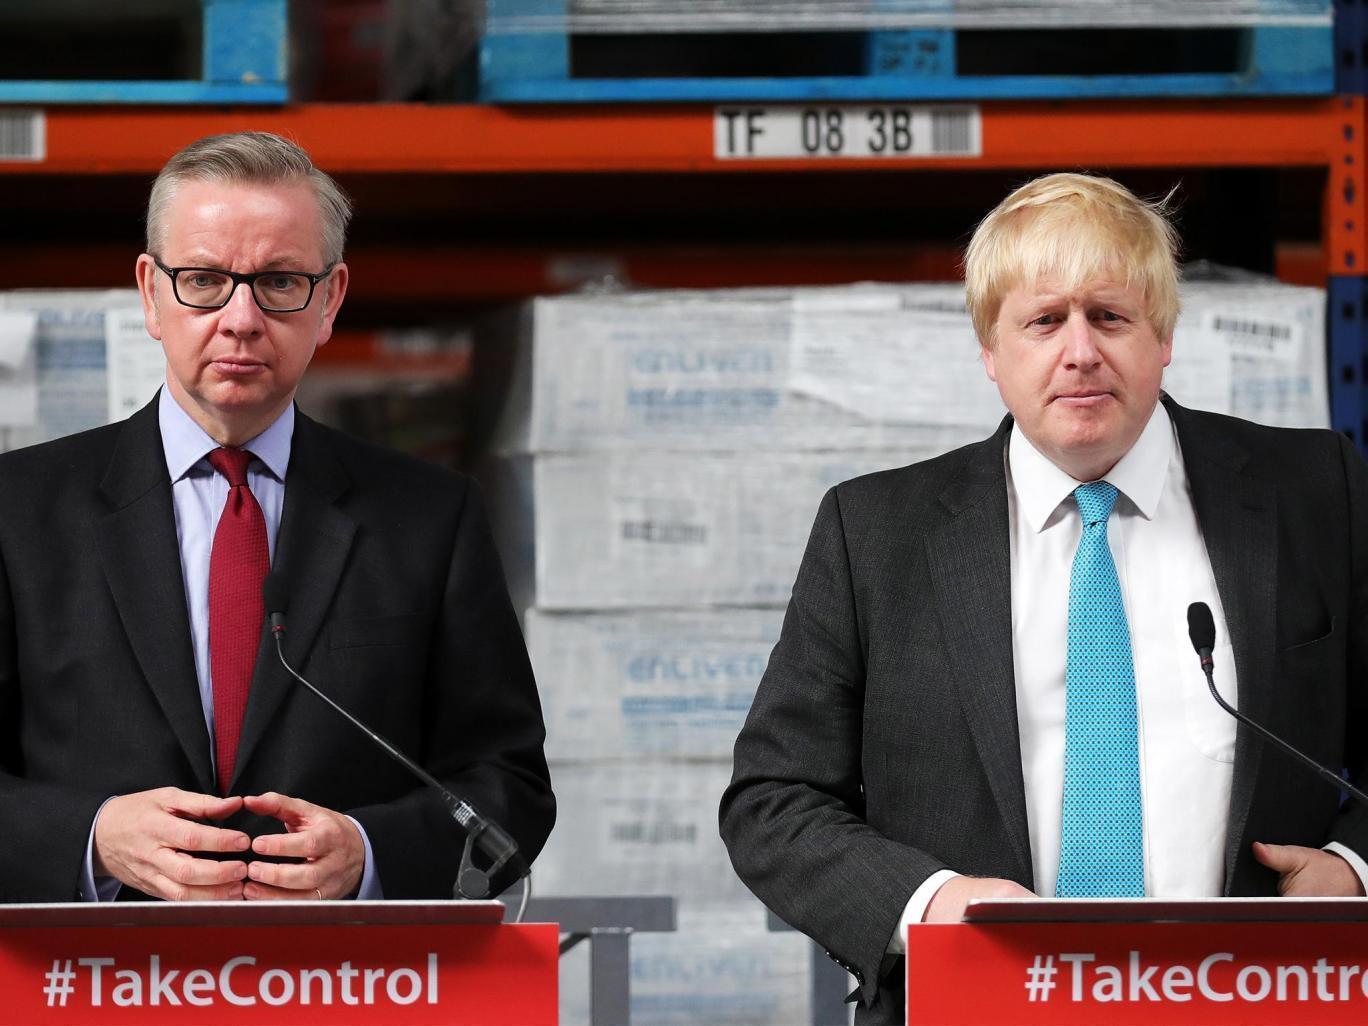 Michael Gove could be chancellor and Boris Johnson prime minister by October